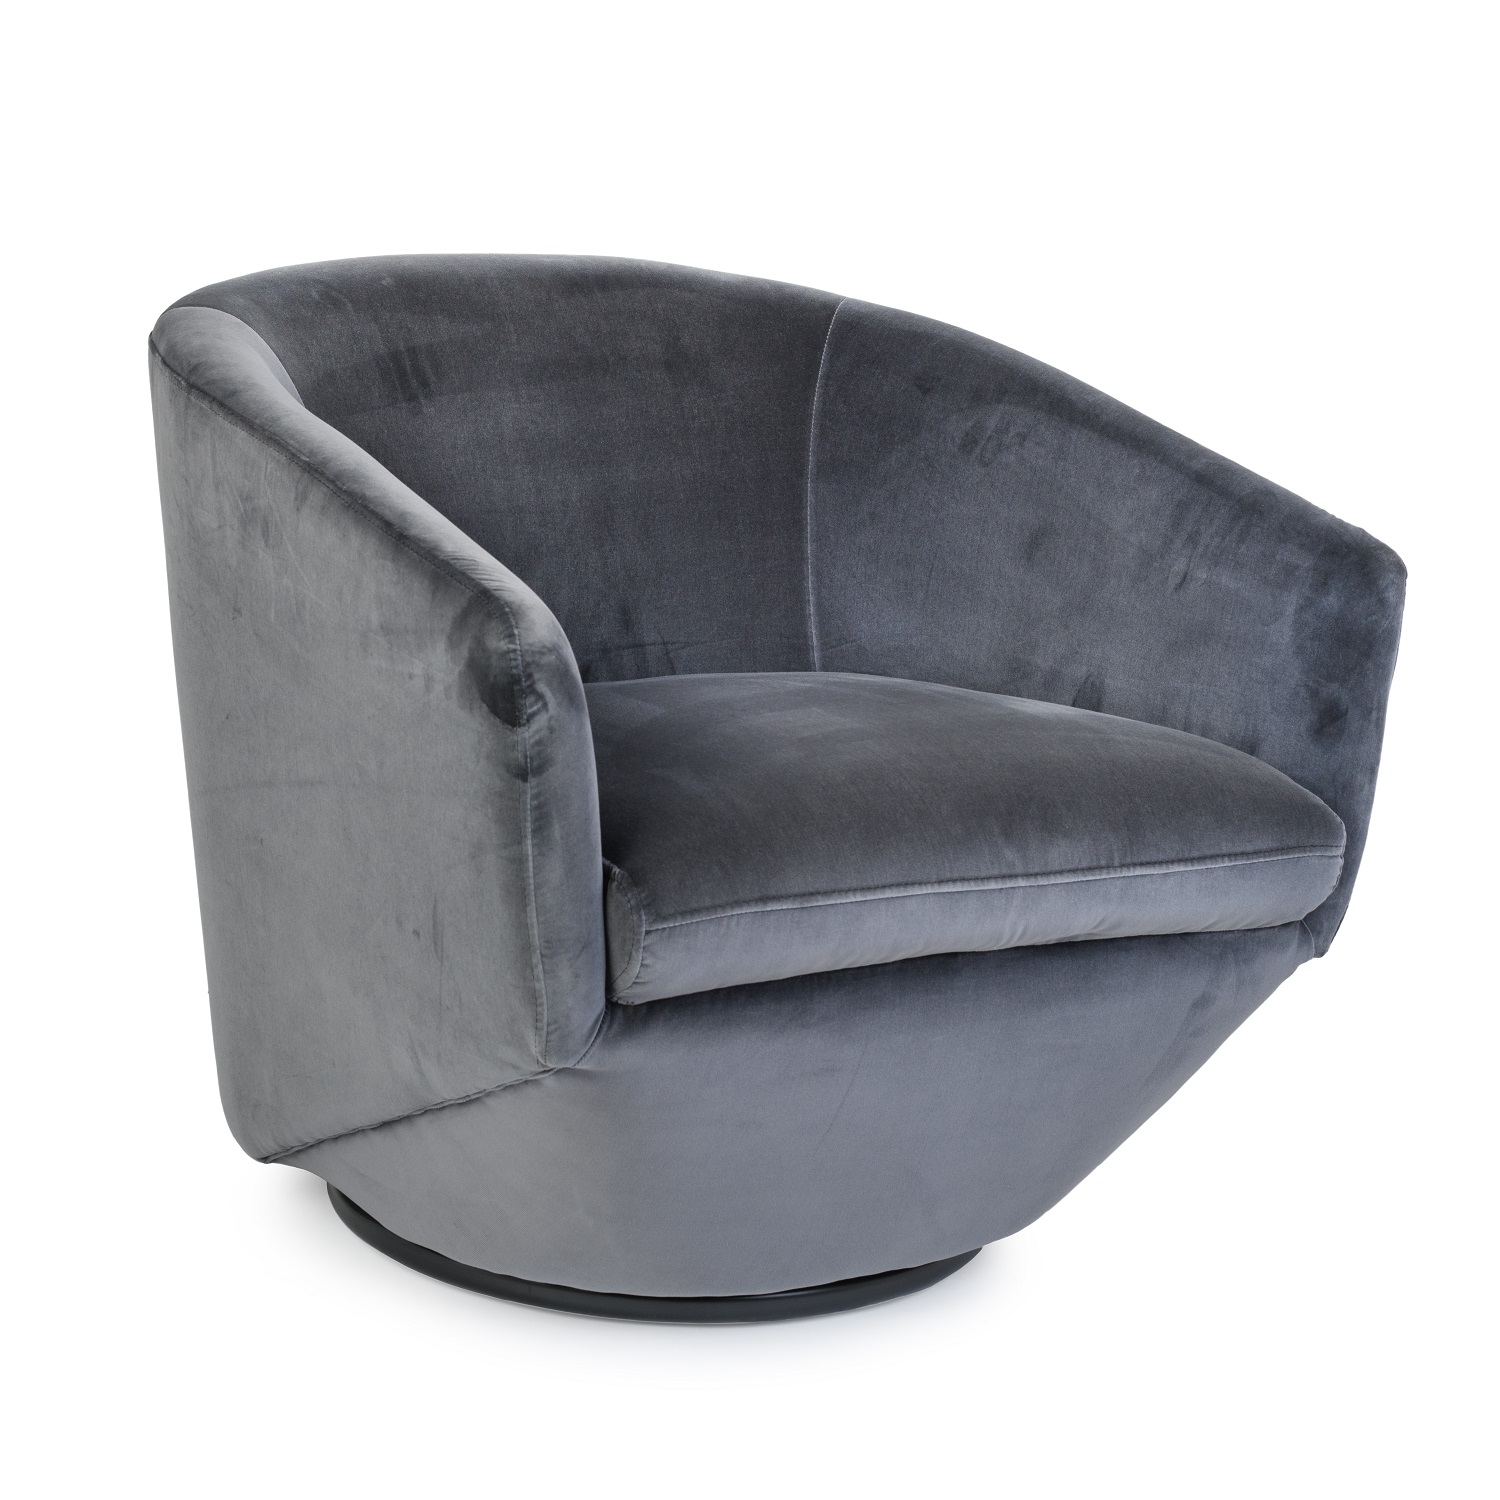 Stylish Swivel Chairs / 10 Swivel Chairs We Re Loving Right Now